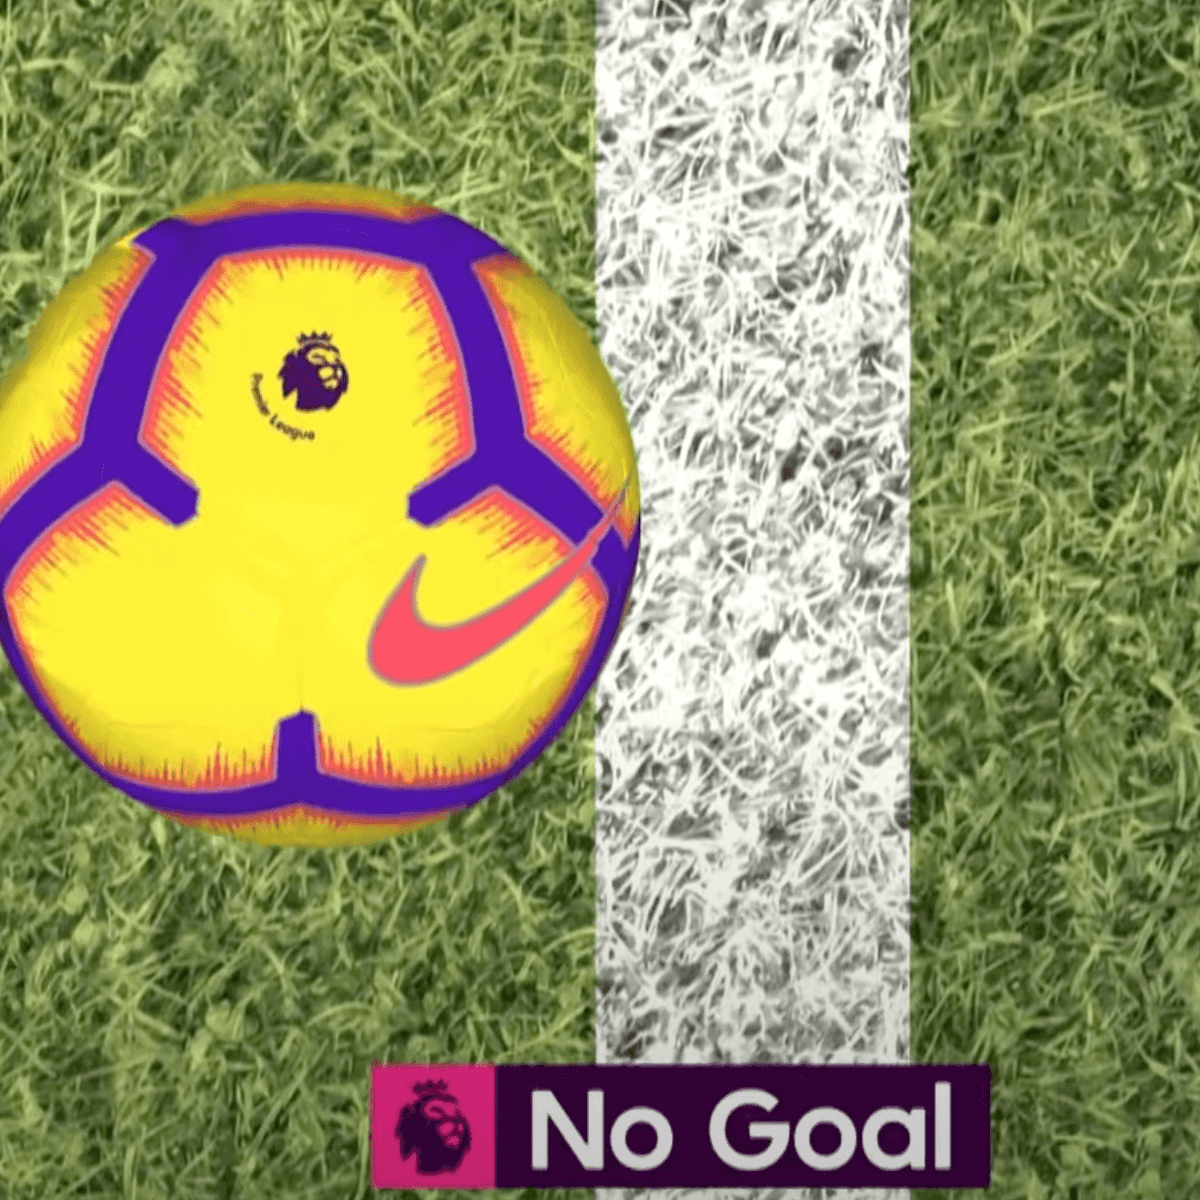 Liverpool were this close to scoring against <strong><a  data-cke-saved-href='https://www.vavel.com/en-us/soccer/2024/03/09/1175469-liverpool-vs-manchester-city-klopp-vs-pep-the-battle-of-the-giants.html' href='https://www.vavel.com/en-us/soccer/2024/03/09/1175469-liverpool-vs-manchester-city-klopp-vs-pep-the-battle-of-the-giants.html'>Manchester City</a></strong>- Ahmed Walid